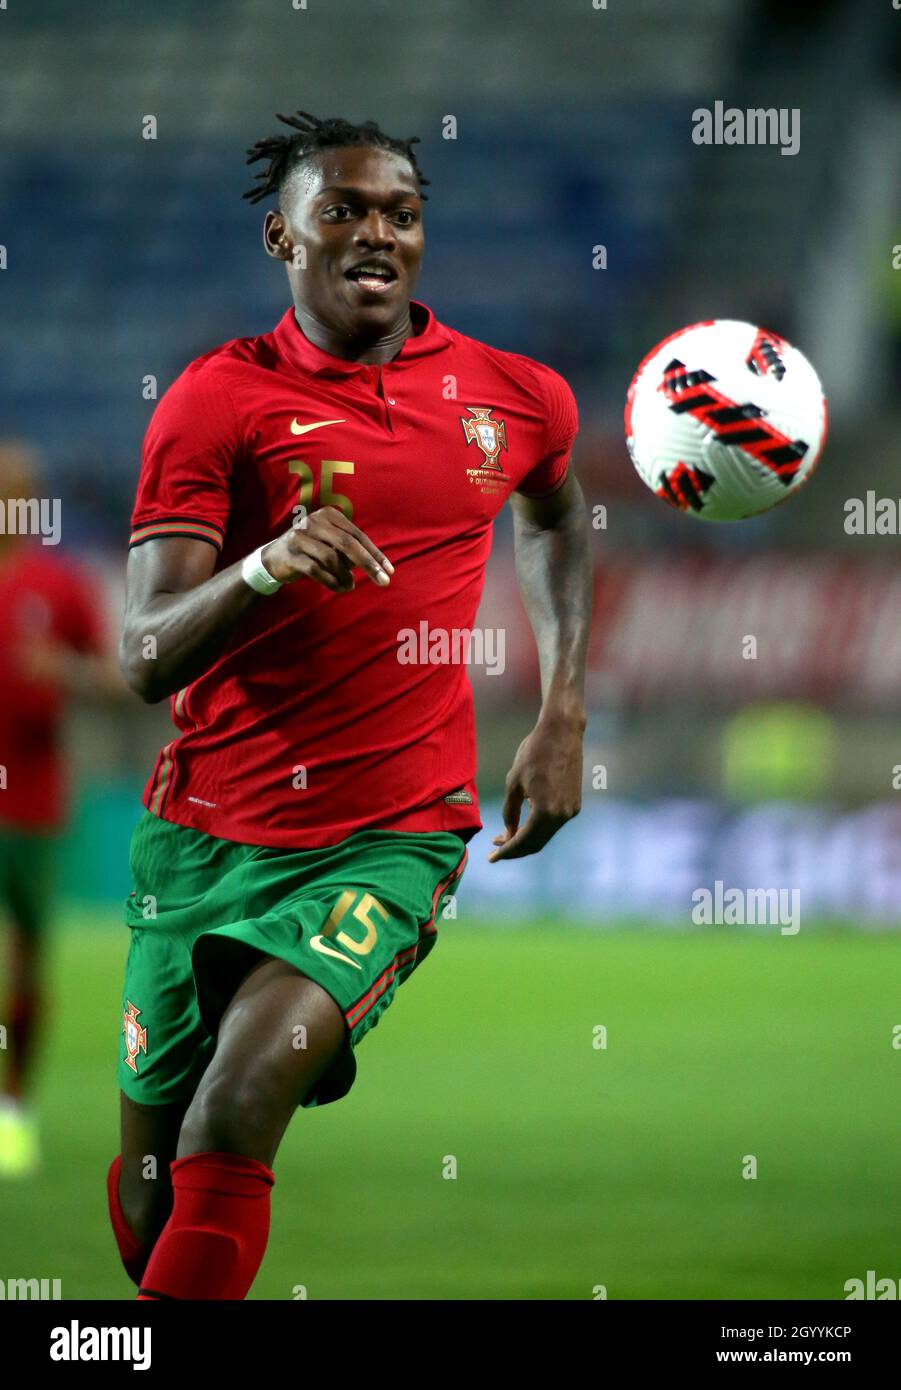 FARO, PORTUGAL - OCTOBER 09: Rafael Leao of Portugal in action ,during the international friendly match between Portugal and Qatar at Estadio Algarve on October 9, 2021 in Faro, Faro. (Photo by MB Media) Stock Photo